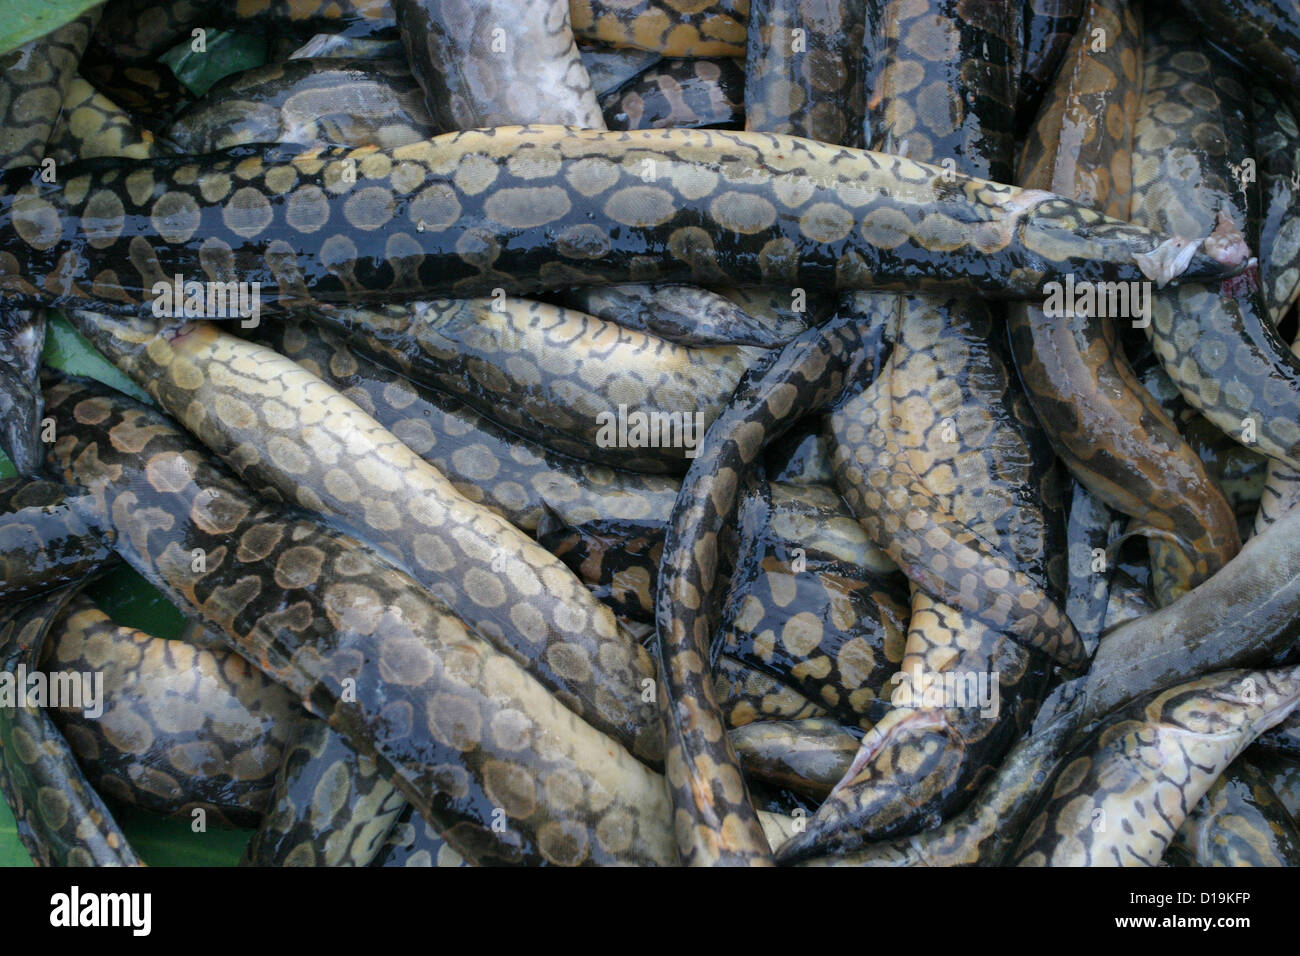 Mastacembelus maculatus or spotted spiny eel. Stock Photo